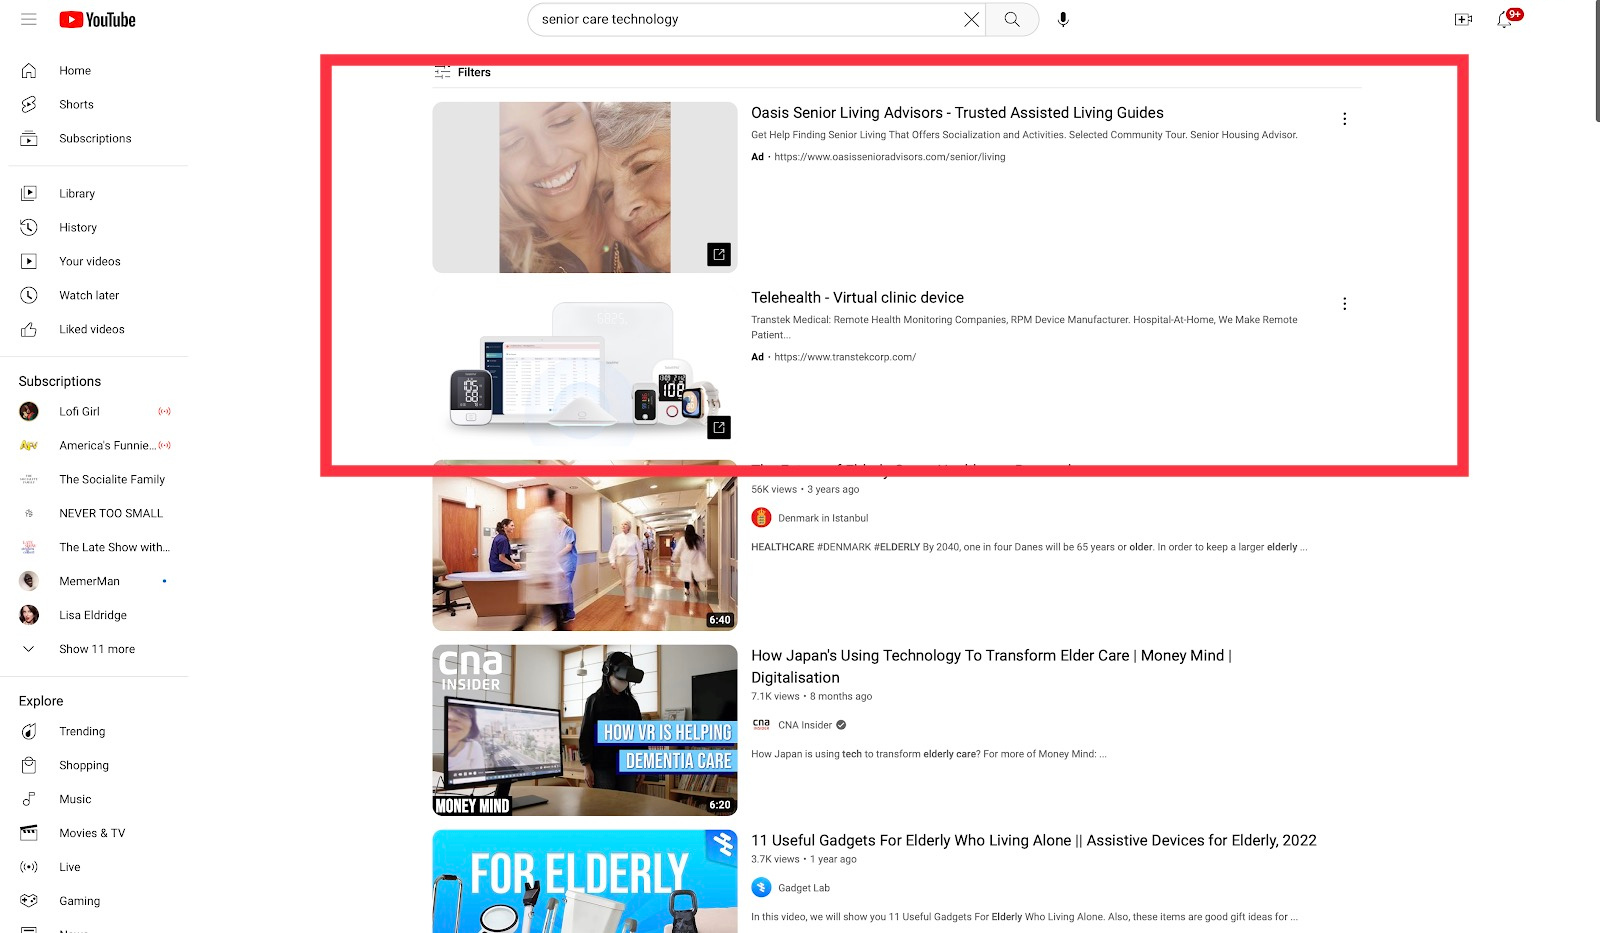 An example of how a search for senior care technology on YouTube results in a paid ad at the top.